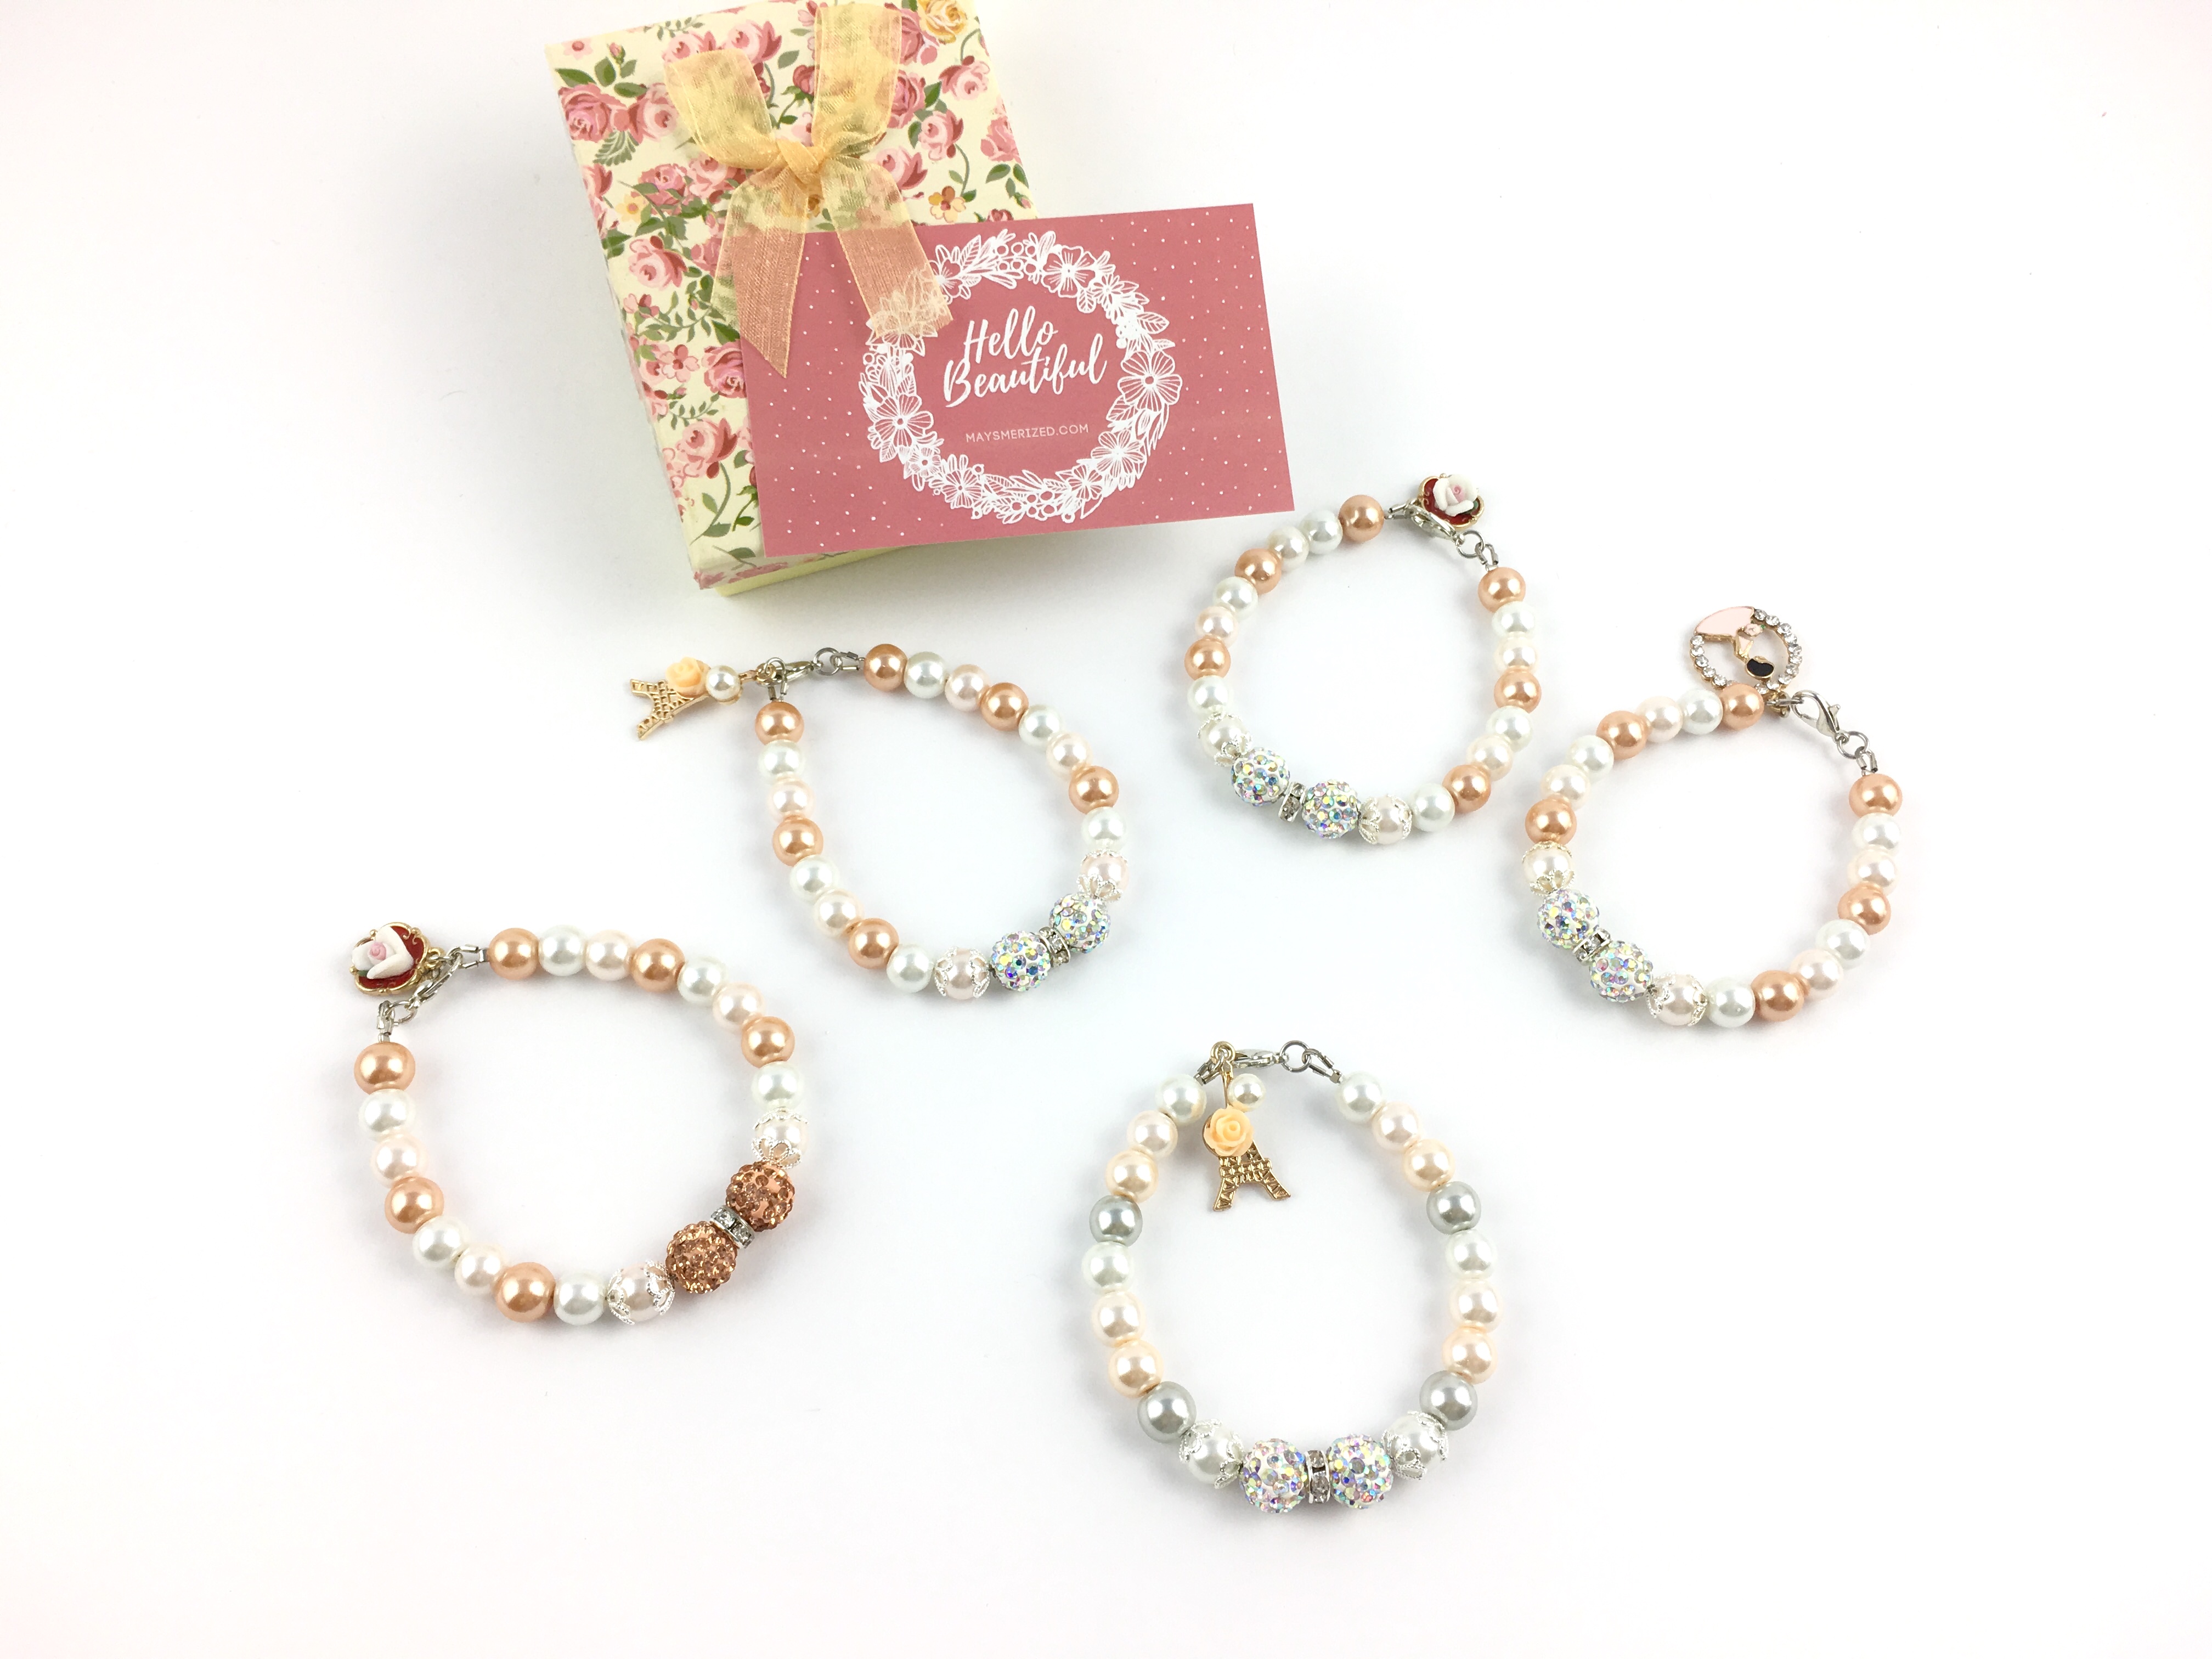 Wedding theme charm bracelet white and gold pearls